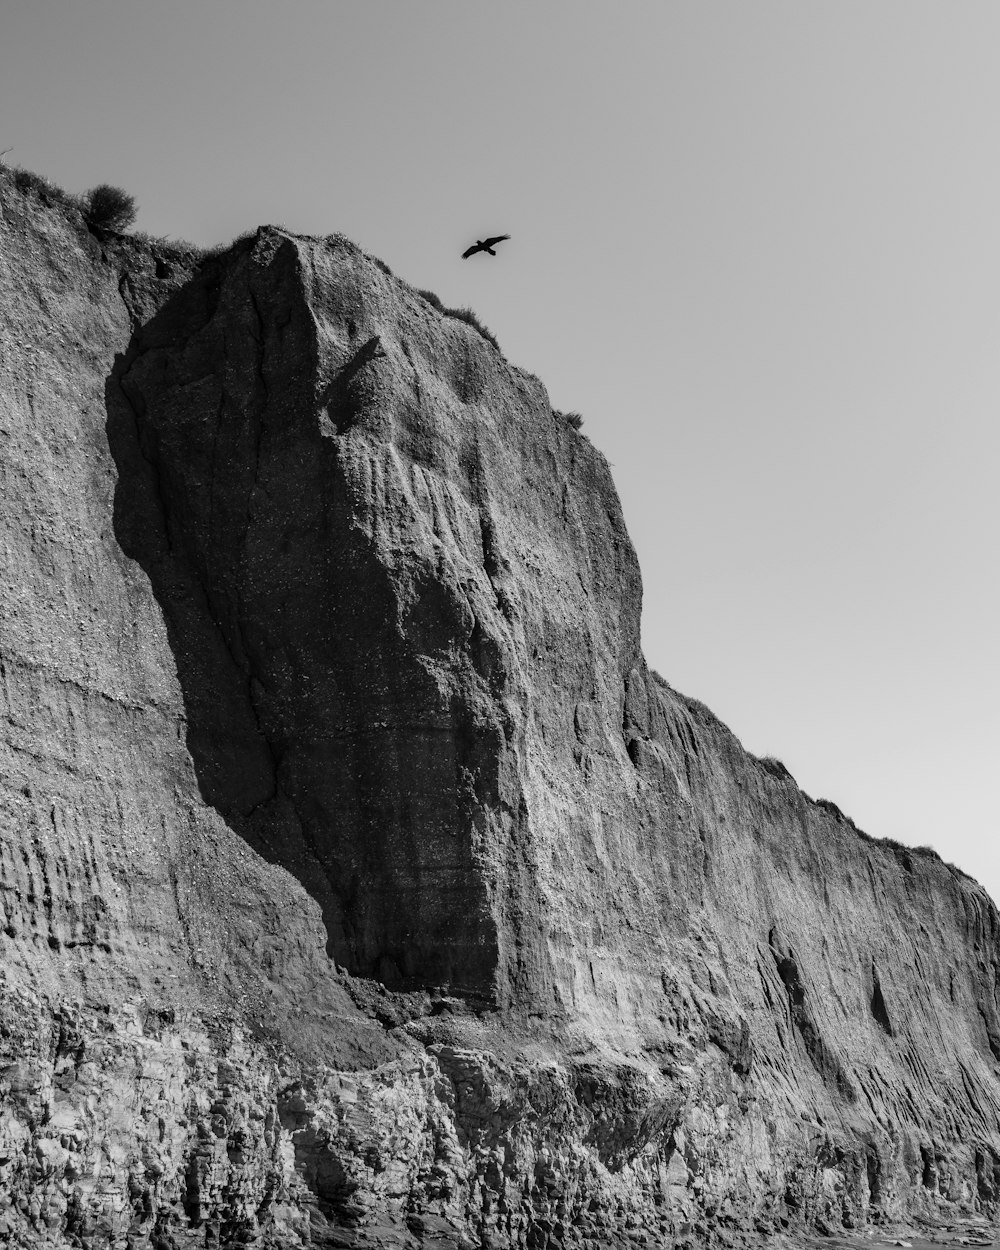 a black and white photo of a bird flying over a cliff